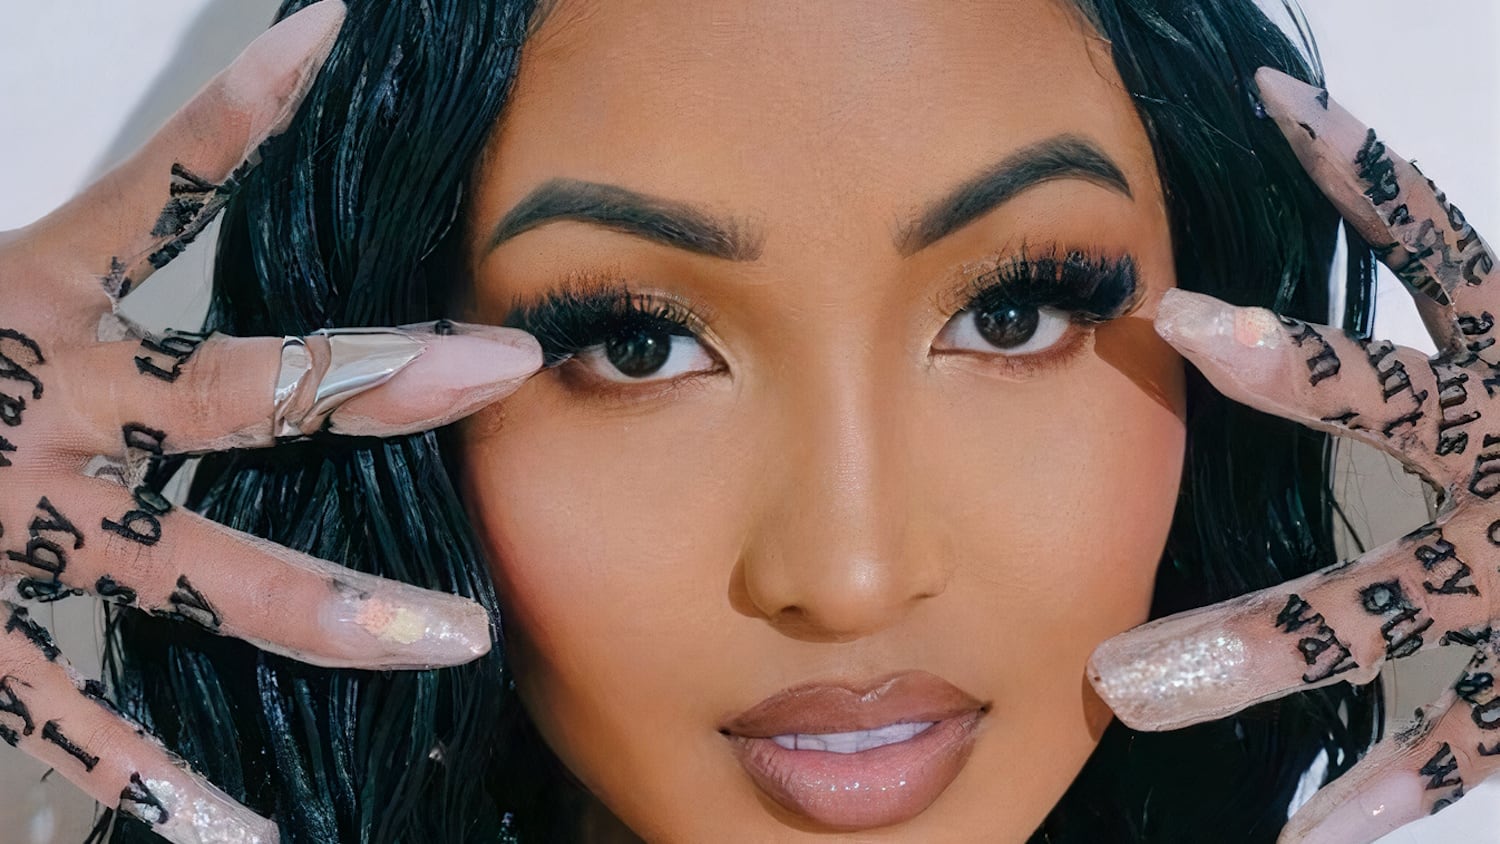 Shenseea Launches Online Merch Store With ‘Alpha’ & ‘Lick’ Apparel Collections